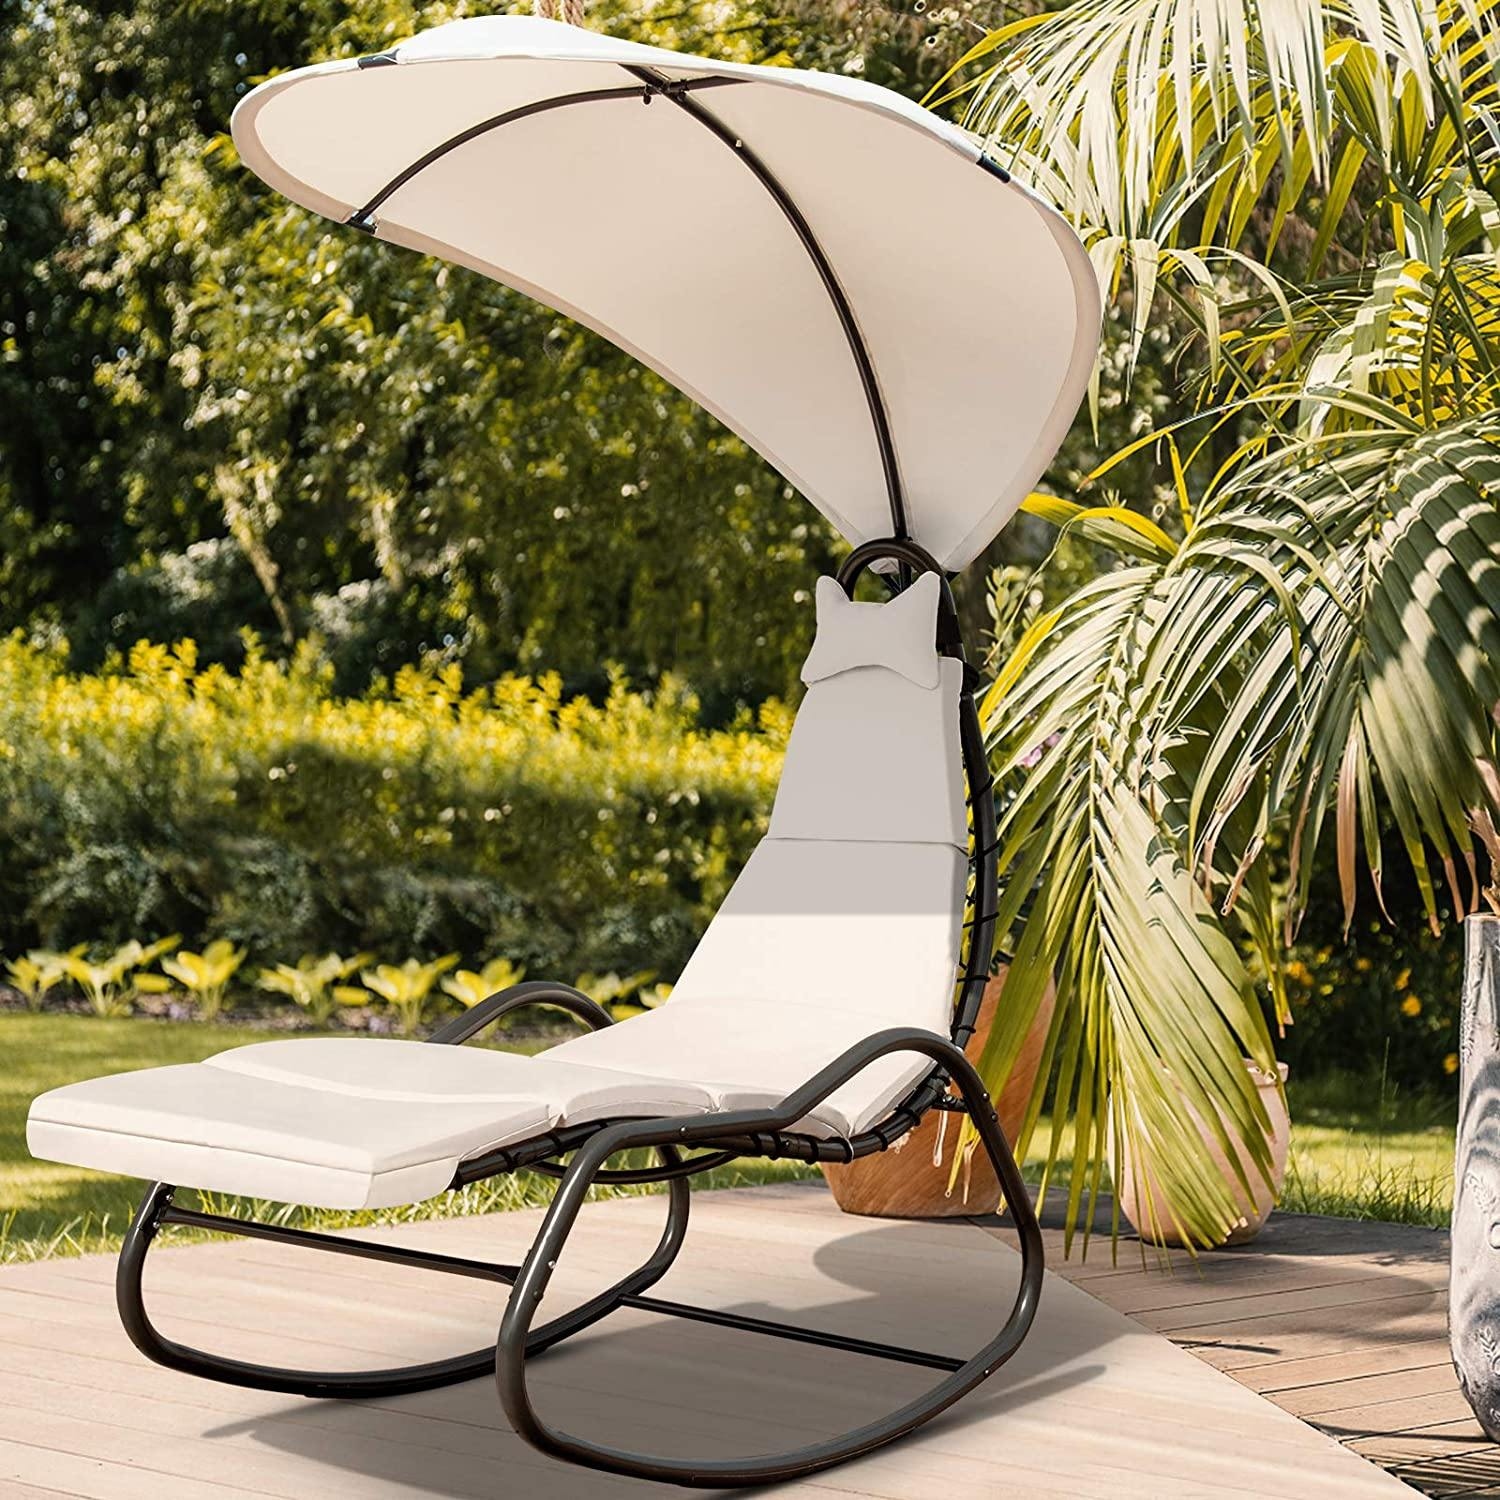 Why to Choose A Lounge Chair?